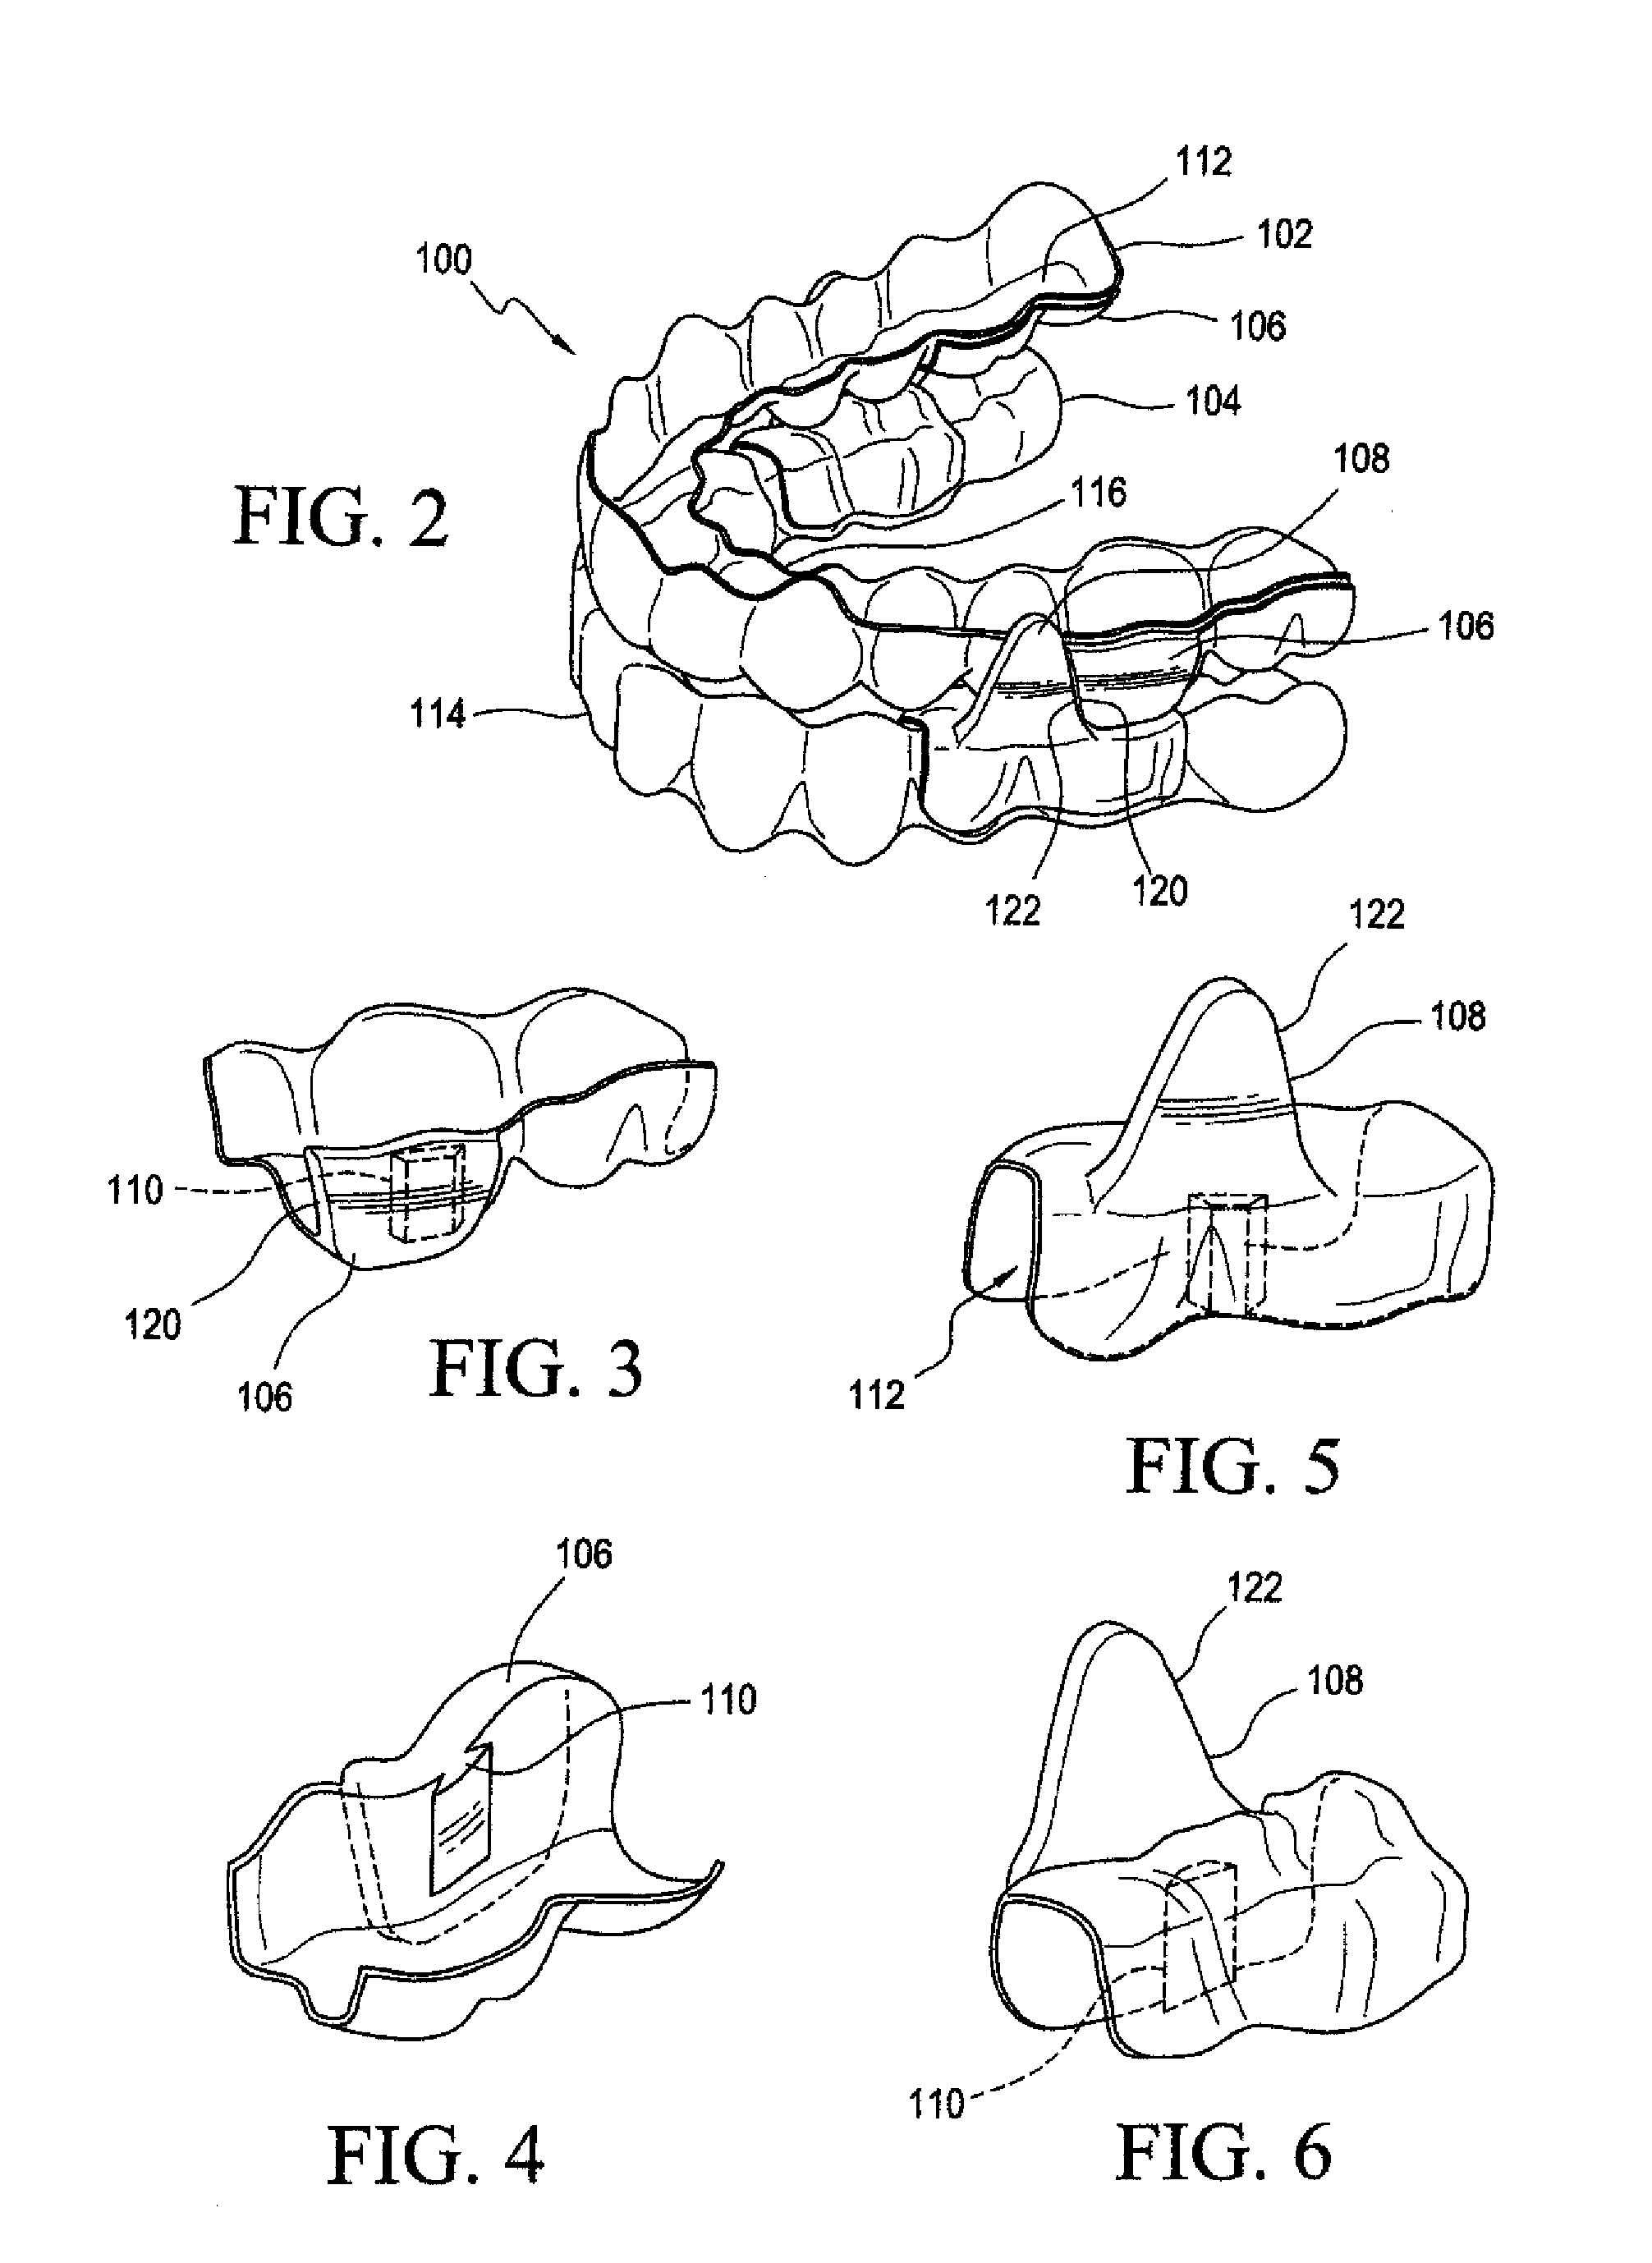 System and Method for Treating Obstructive Sleep Apnea and Correcting Malocclusion Simultaneously